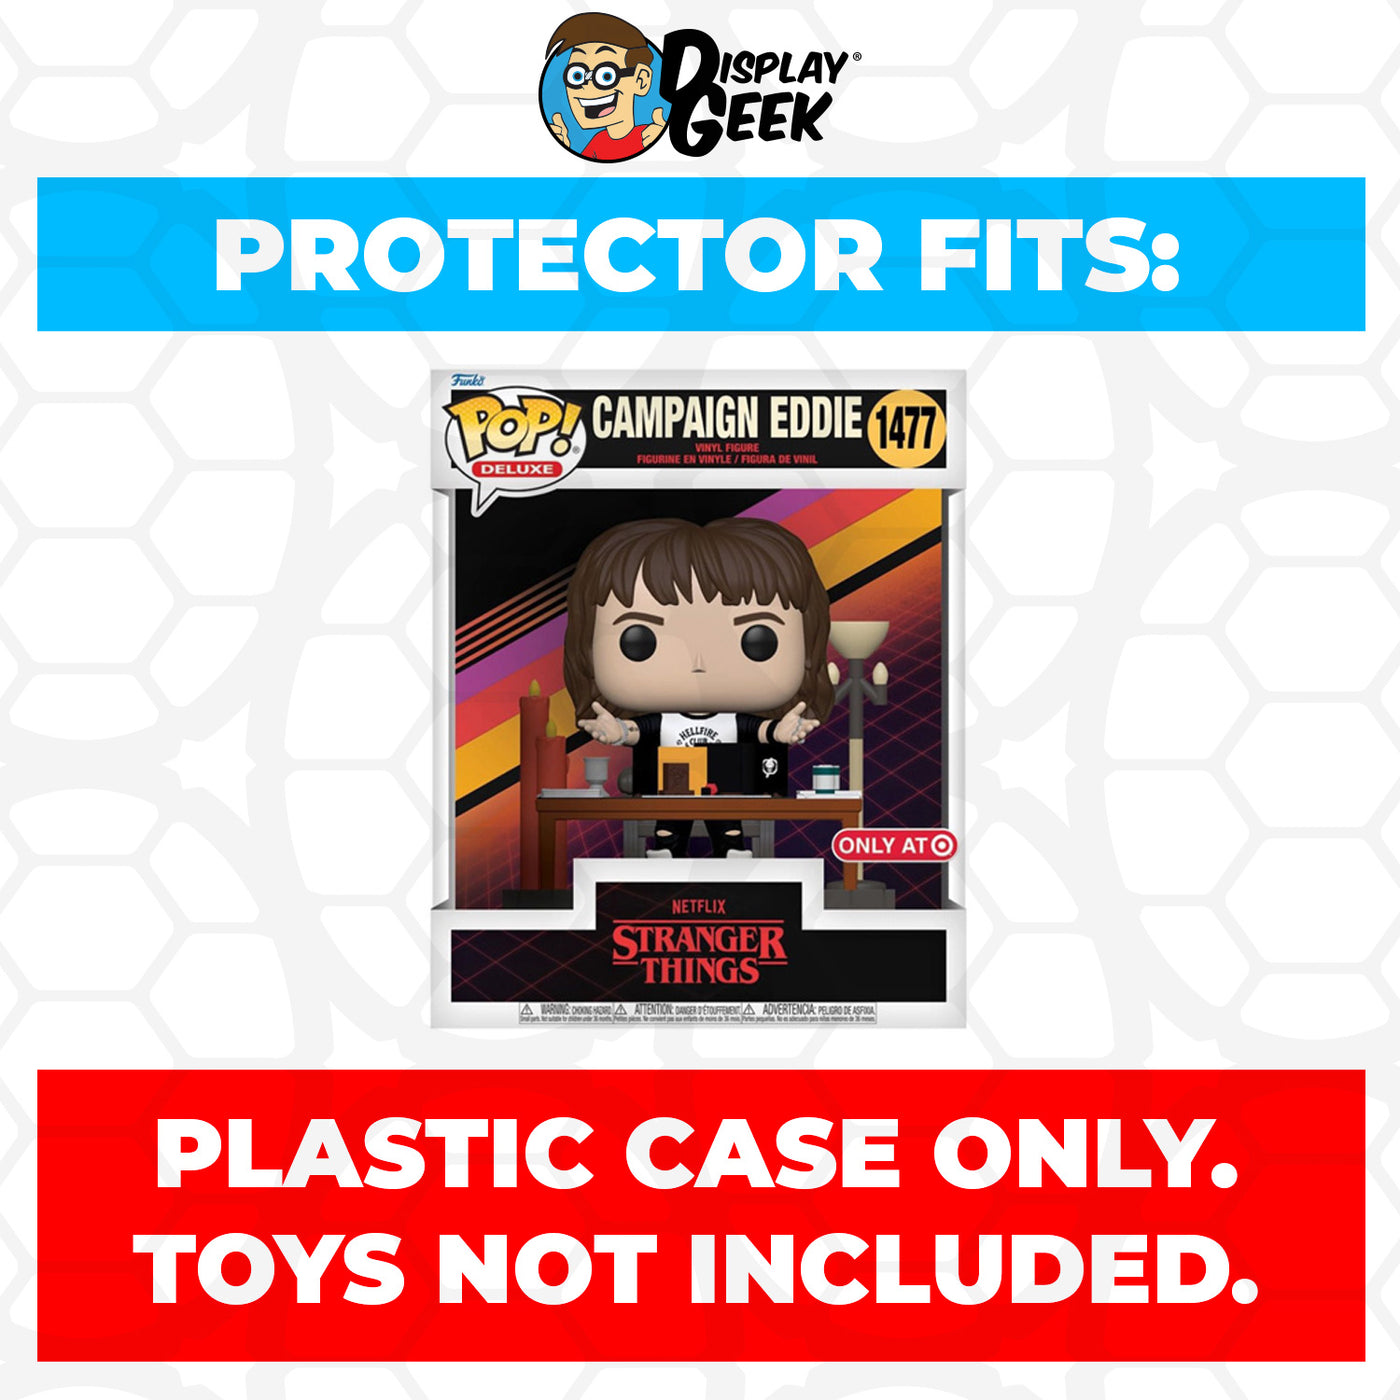 Pop Protector for Campaign Eddie #1477 Funko Pop Deluxe on The Protector Guide App by Display Geek